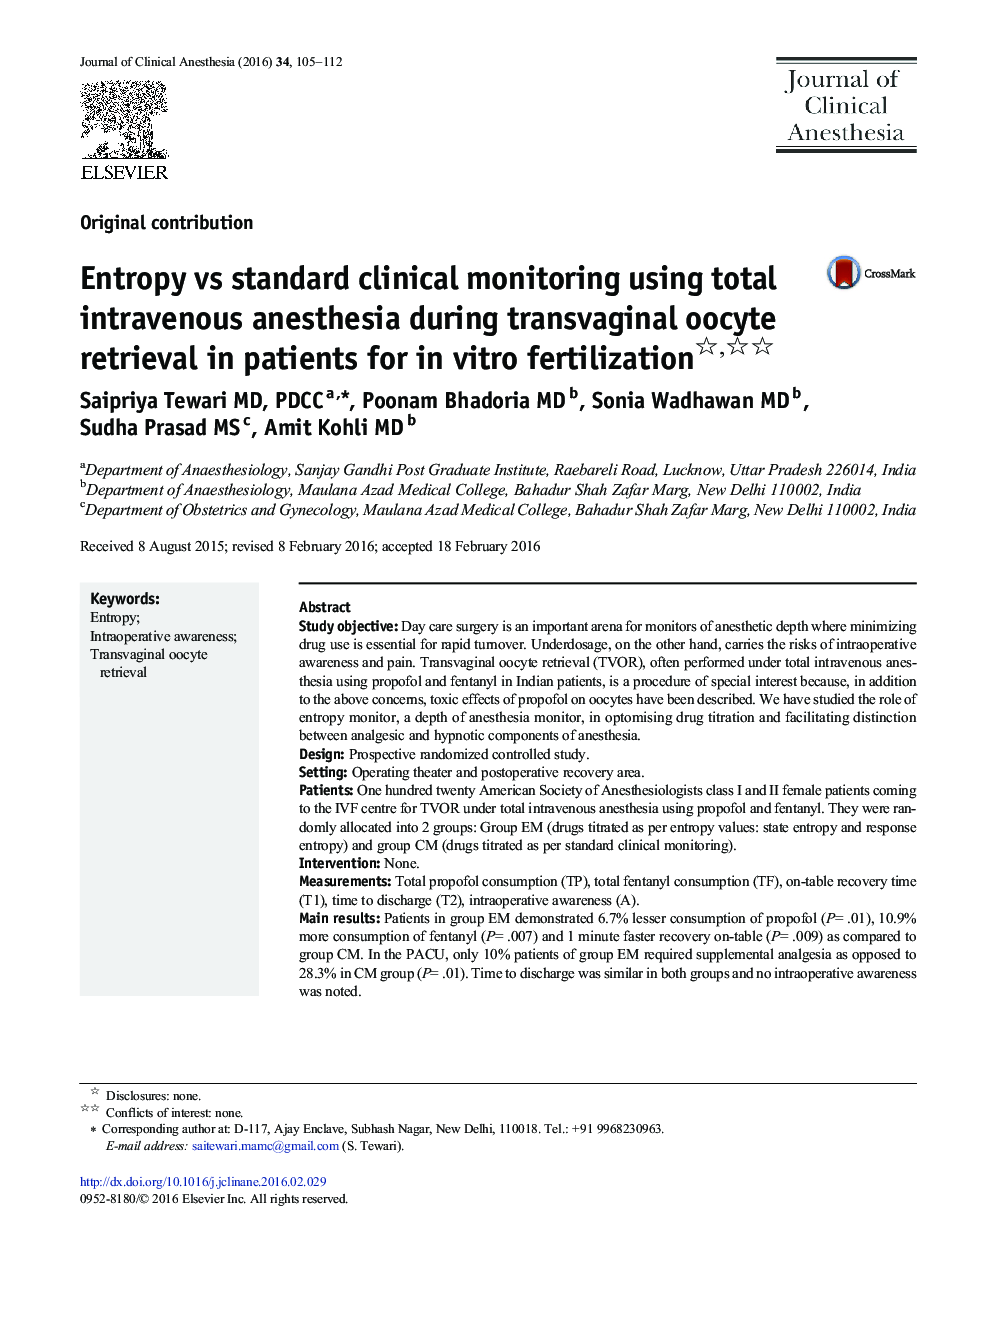 Entropy vs standard clinical monitoring using total intravenous anesthesia during transvaginal oocyte retrieval in patients for in vitro fertilization